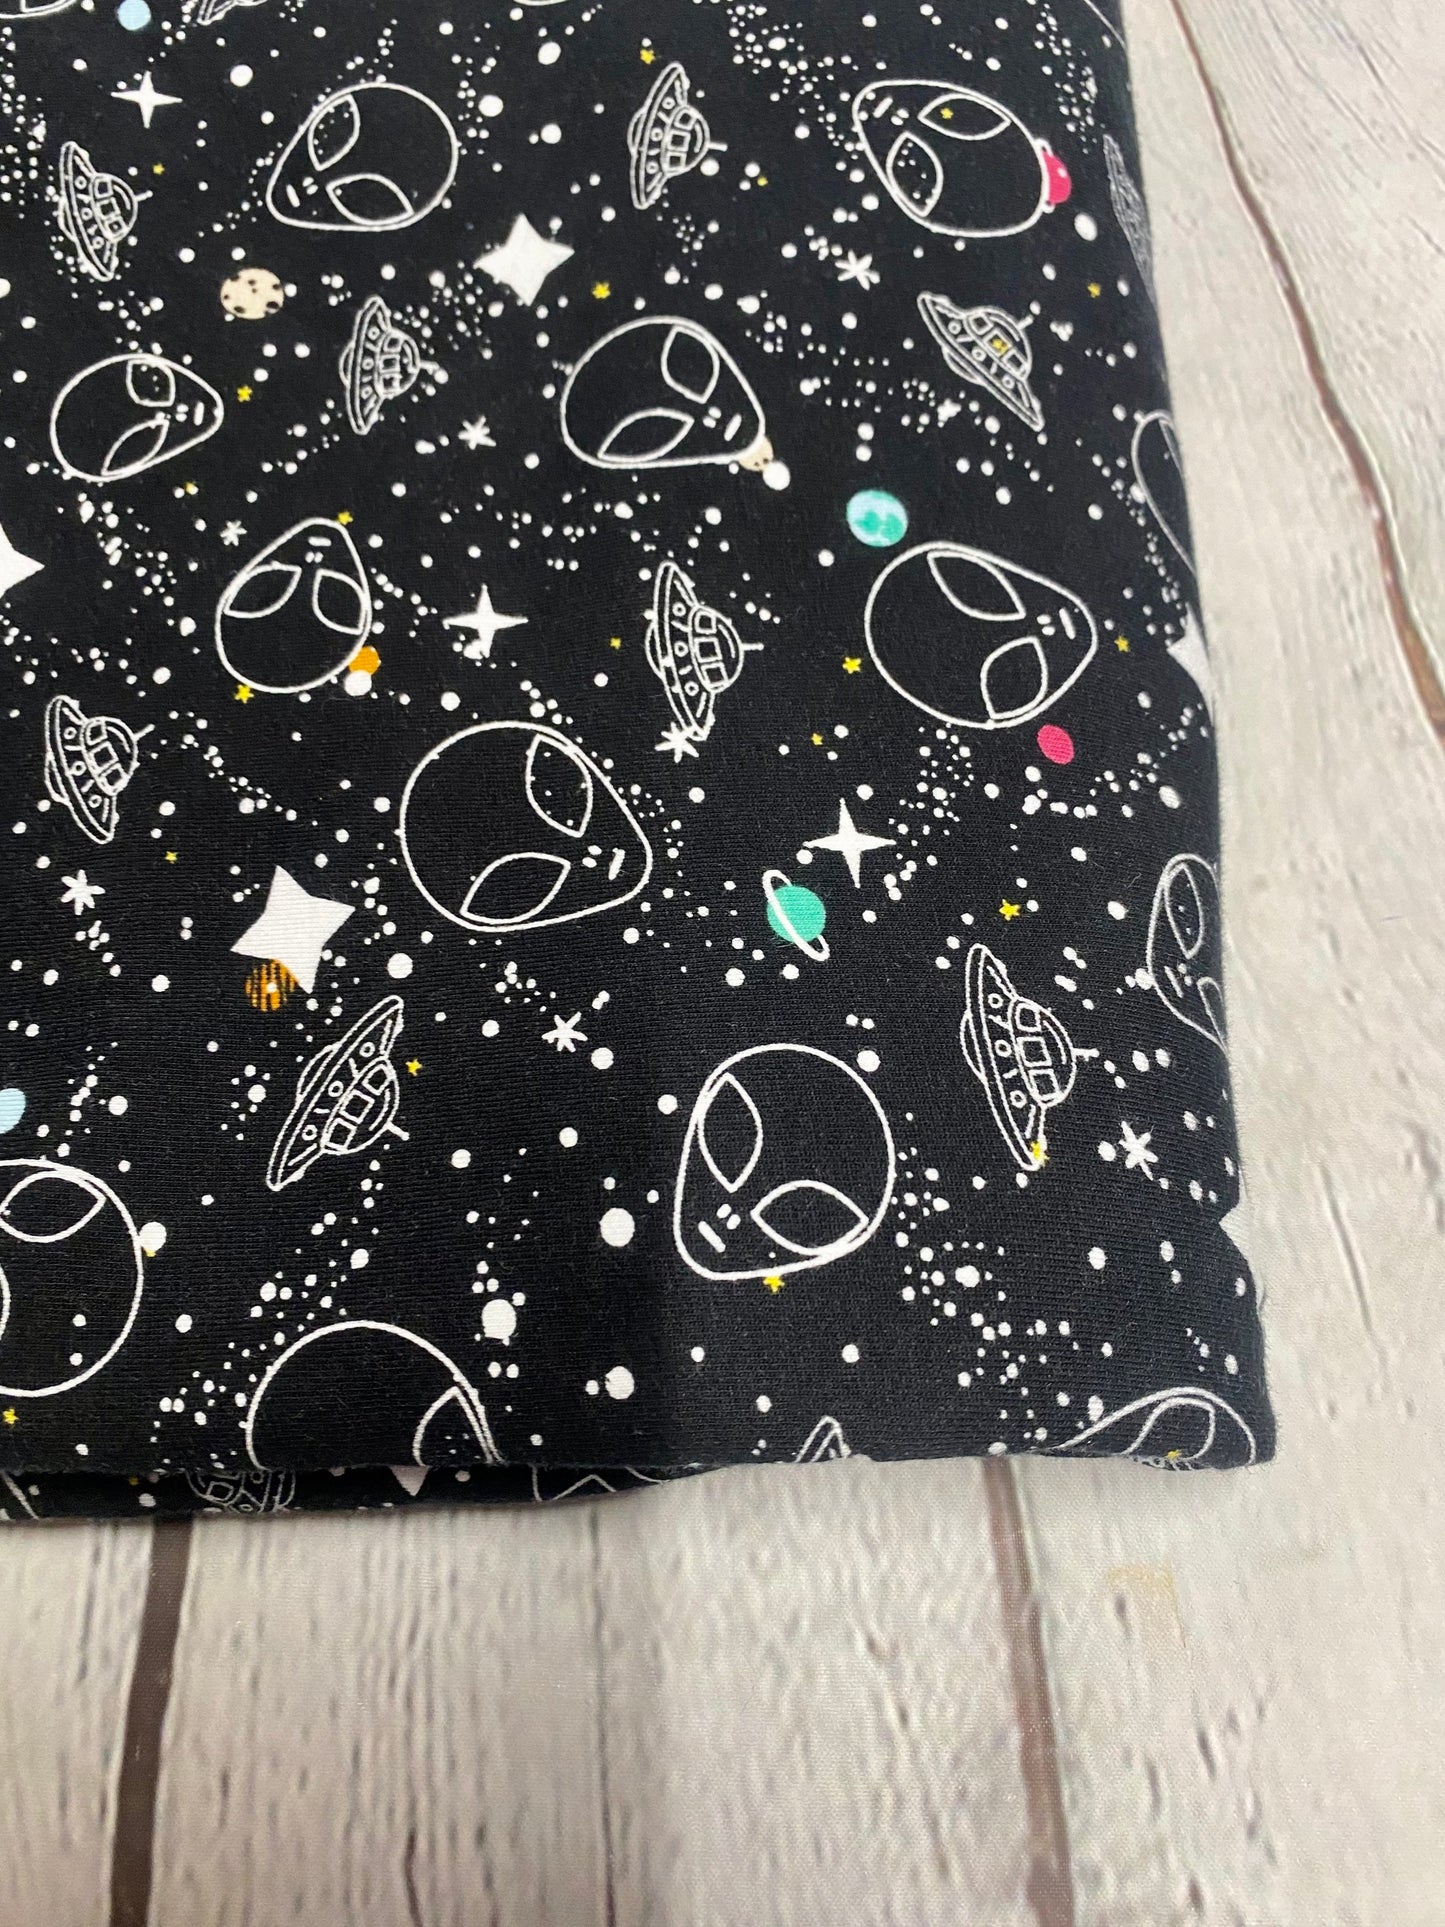 Heavy Weight Cotton Spandex Alien Space Print fabric By The Yard 240 GSM